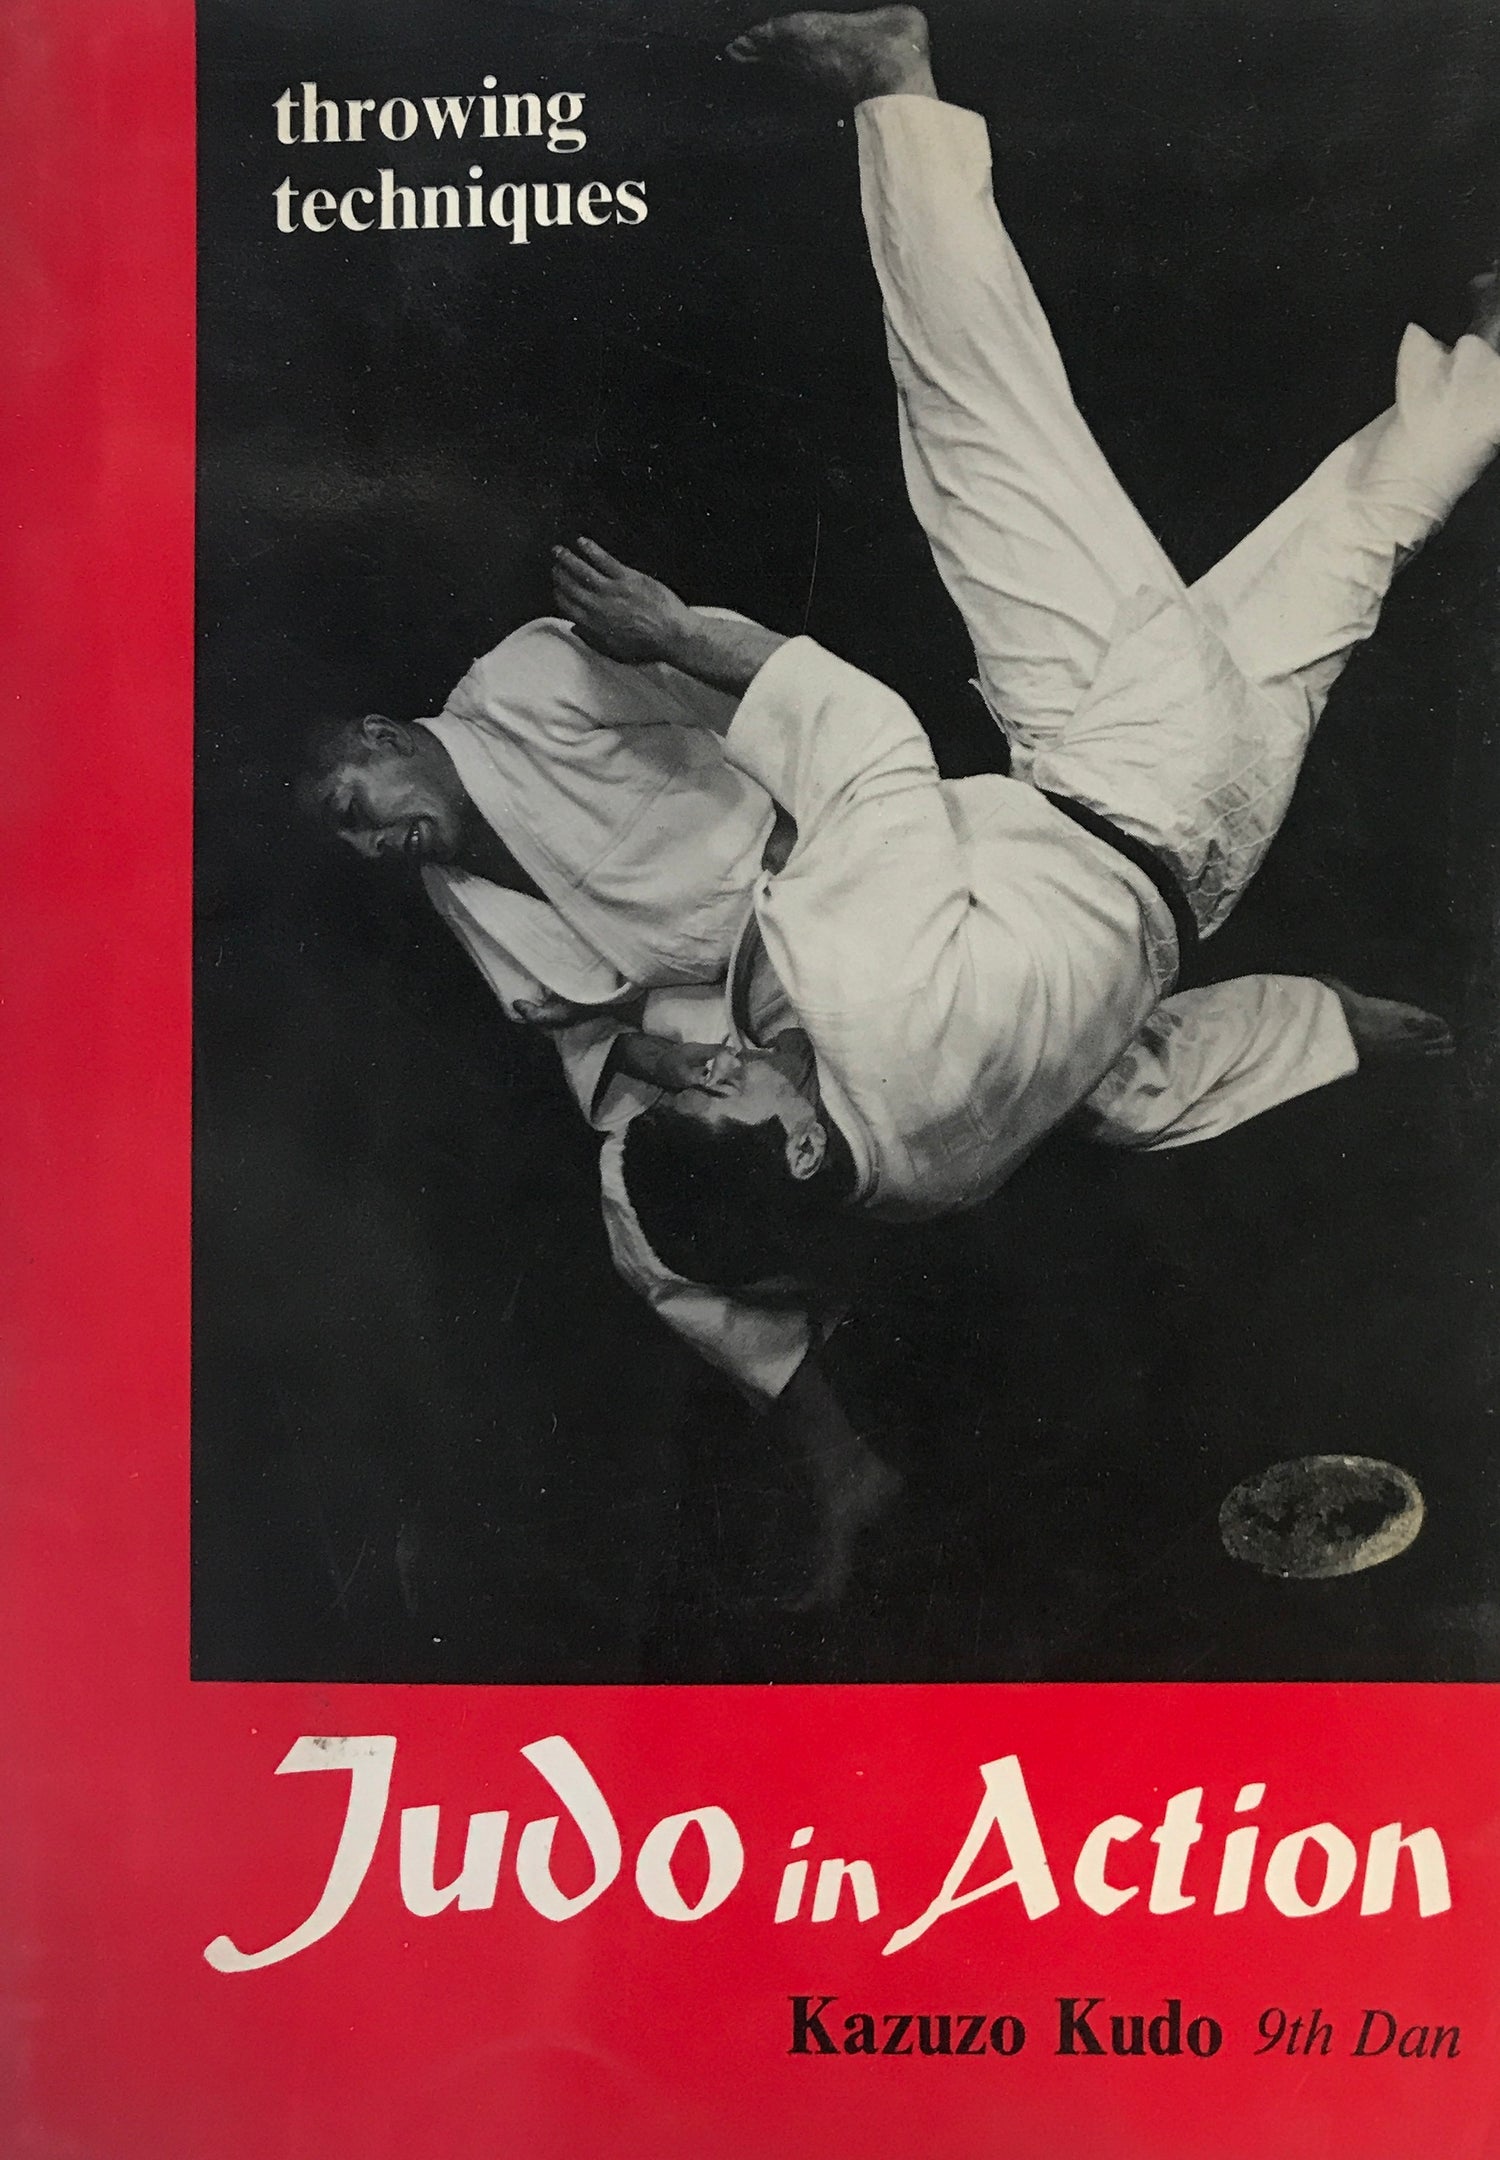 Judo in Action: Throwing Techniques Book by Kazuzo Kudo (Preowned) - Budovideos Inc